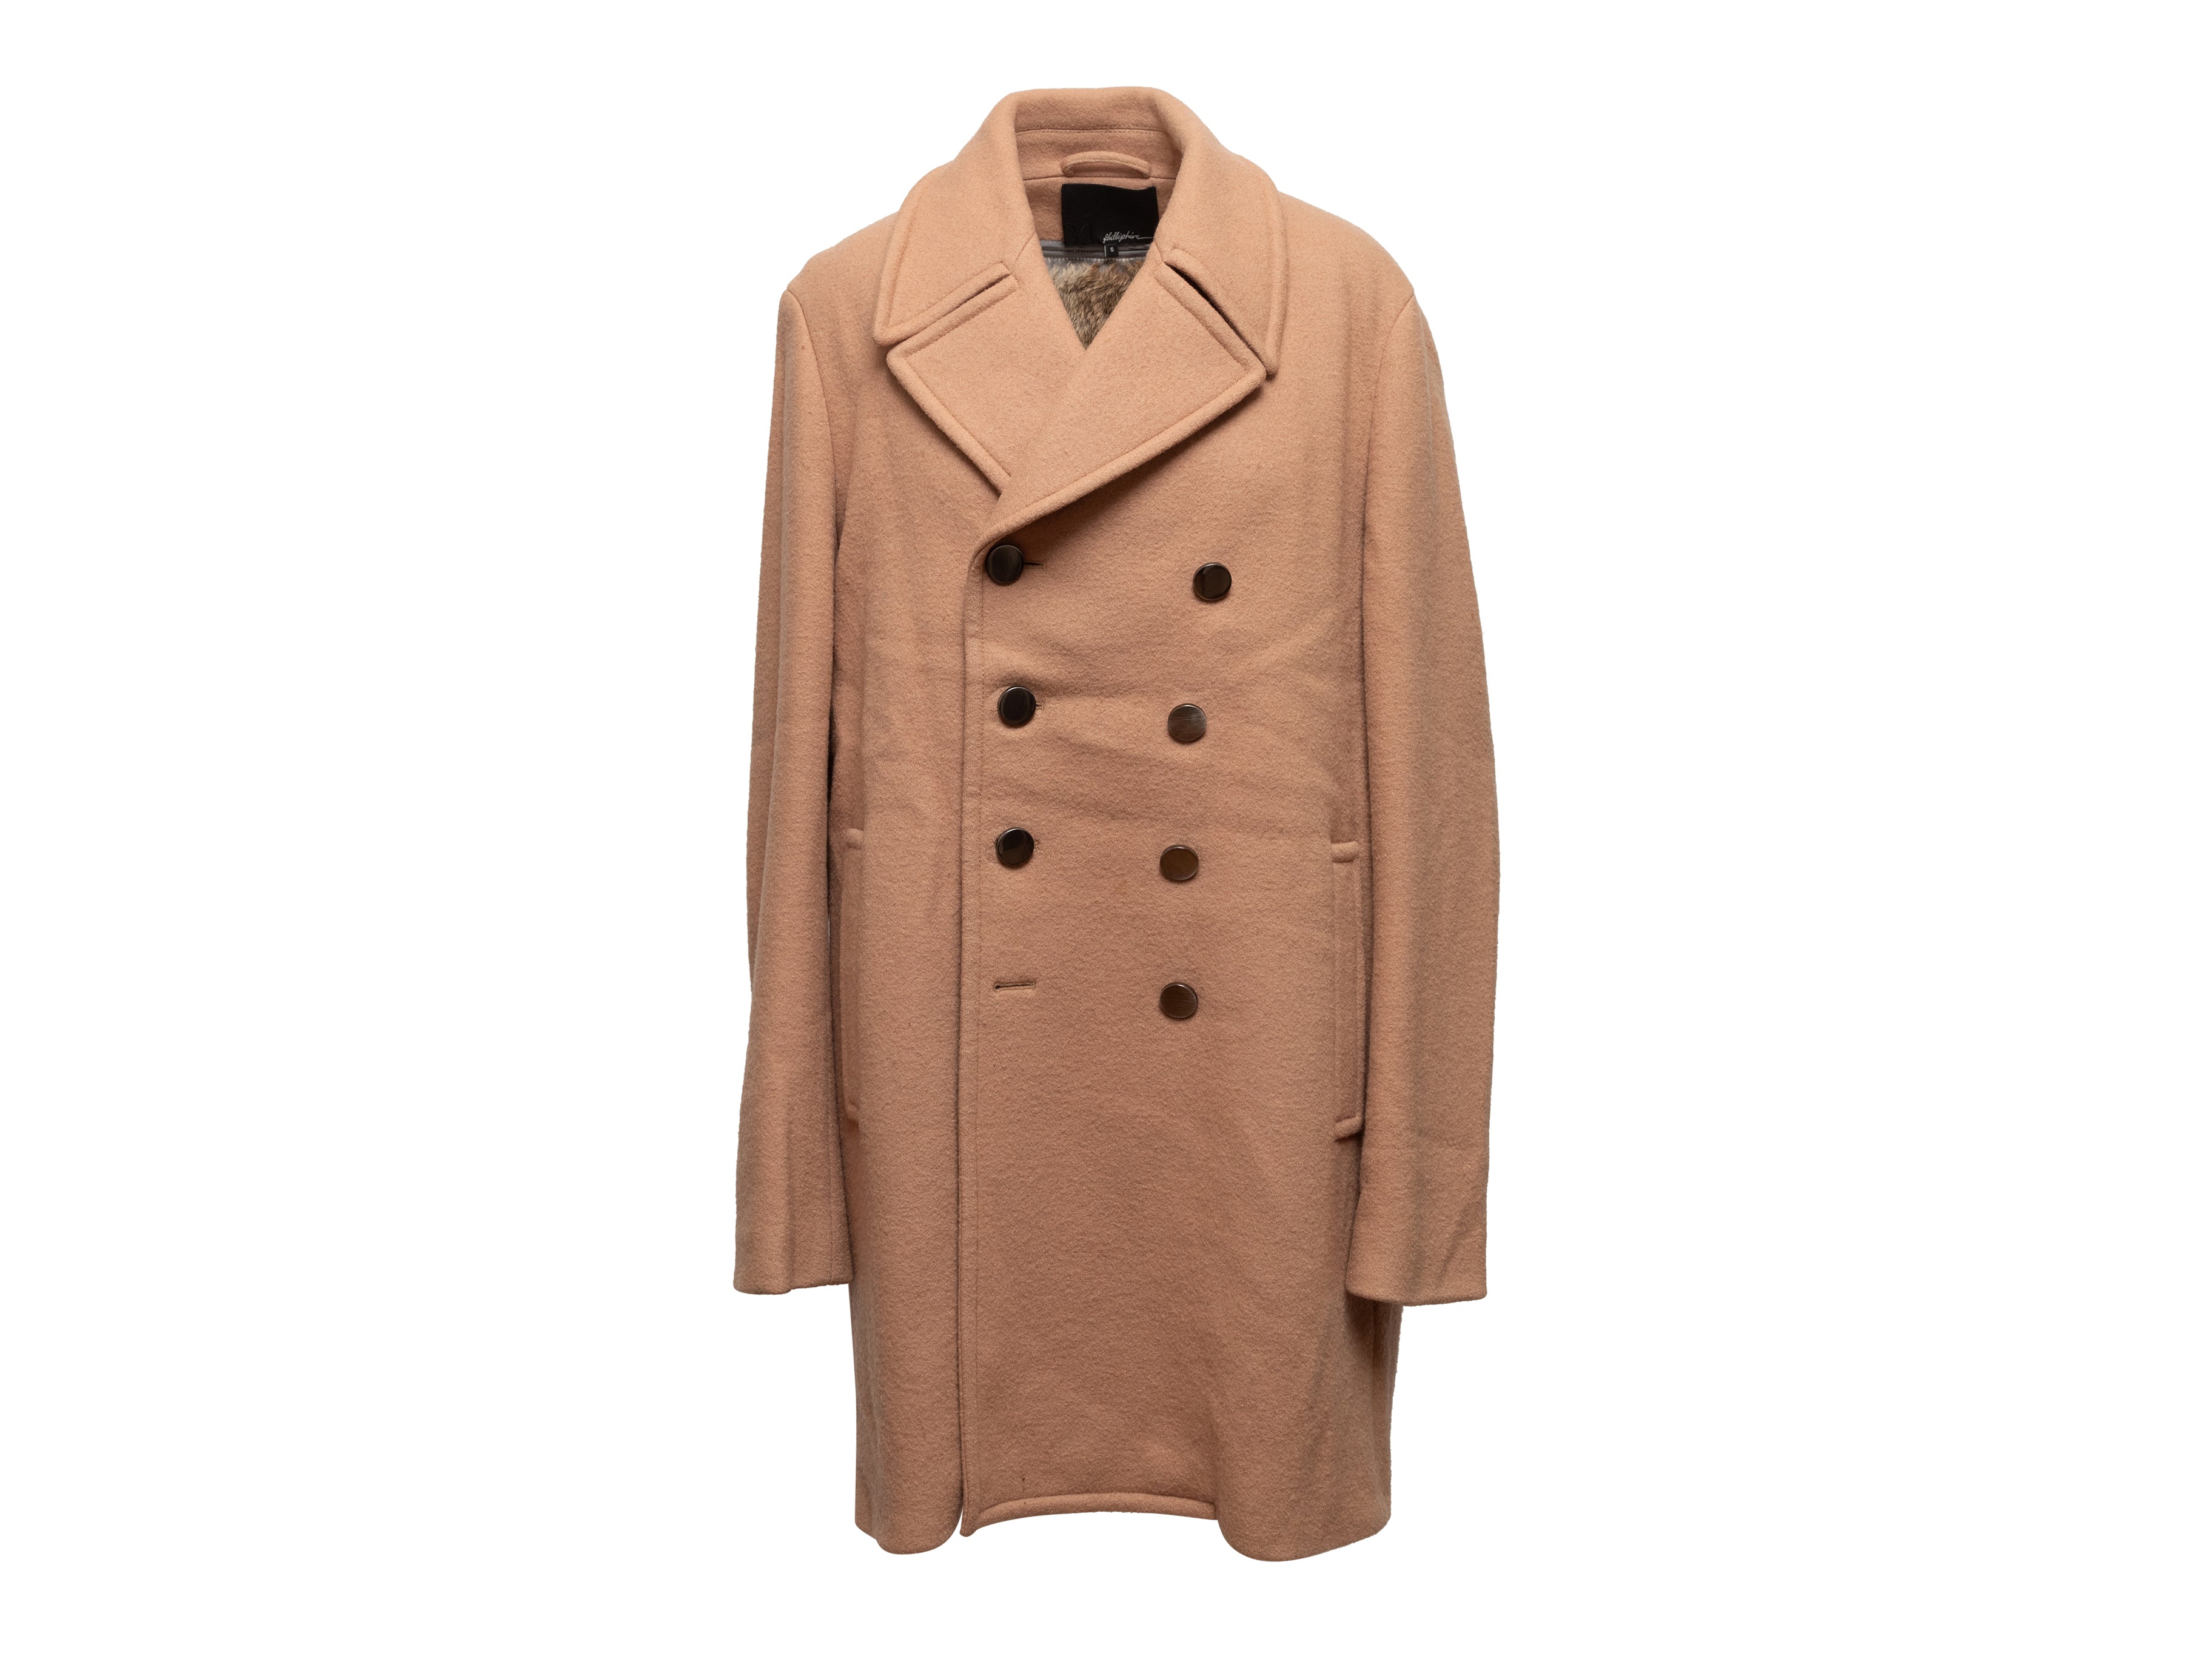 Tan Phillip Lim Wool Double-Breasted Fur-Lined Coat Size S - Designer Revival